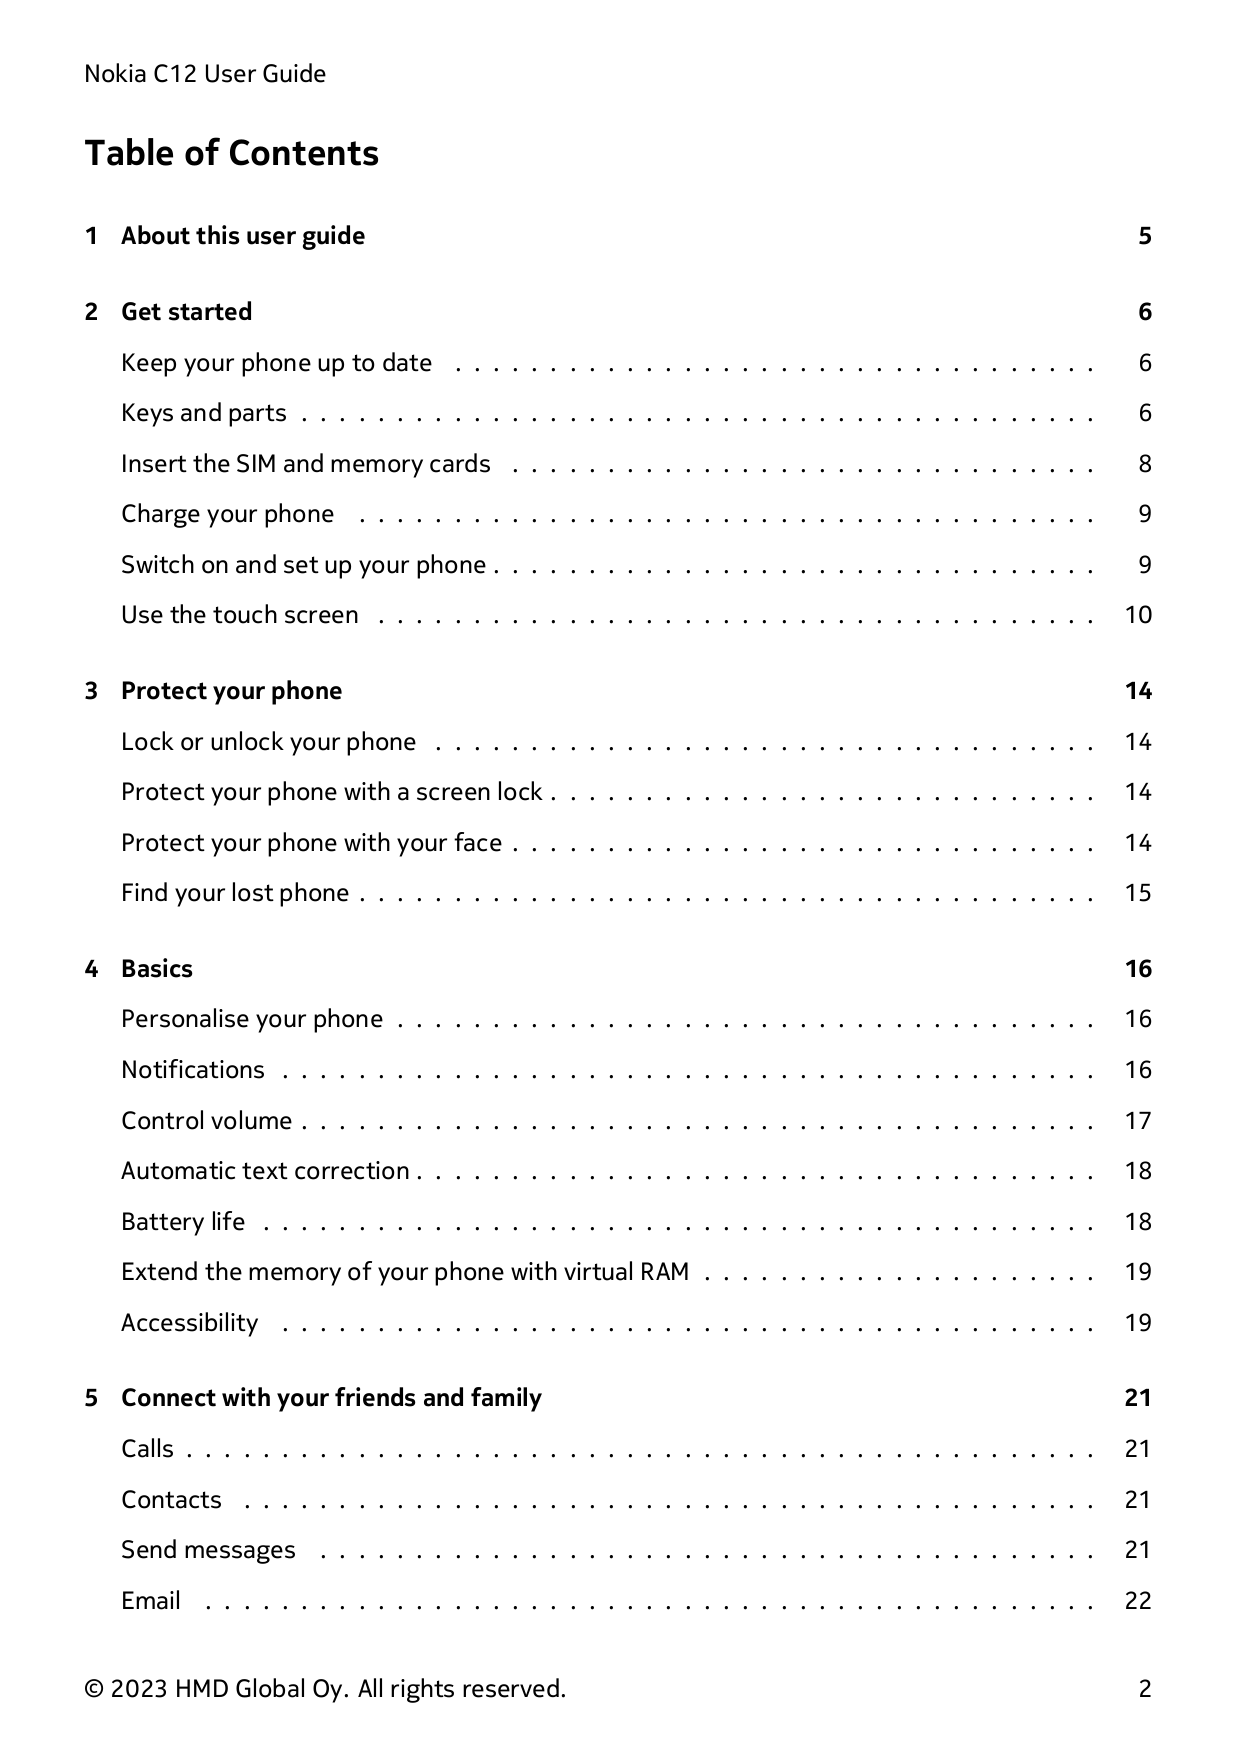 Nokia C12 User GuideTable of Contents1 About this user guide52 Get started6Keep your phone up to date . . . . . . . . . . . . . 